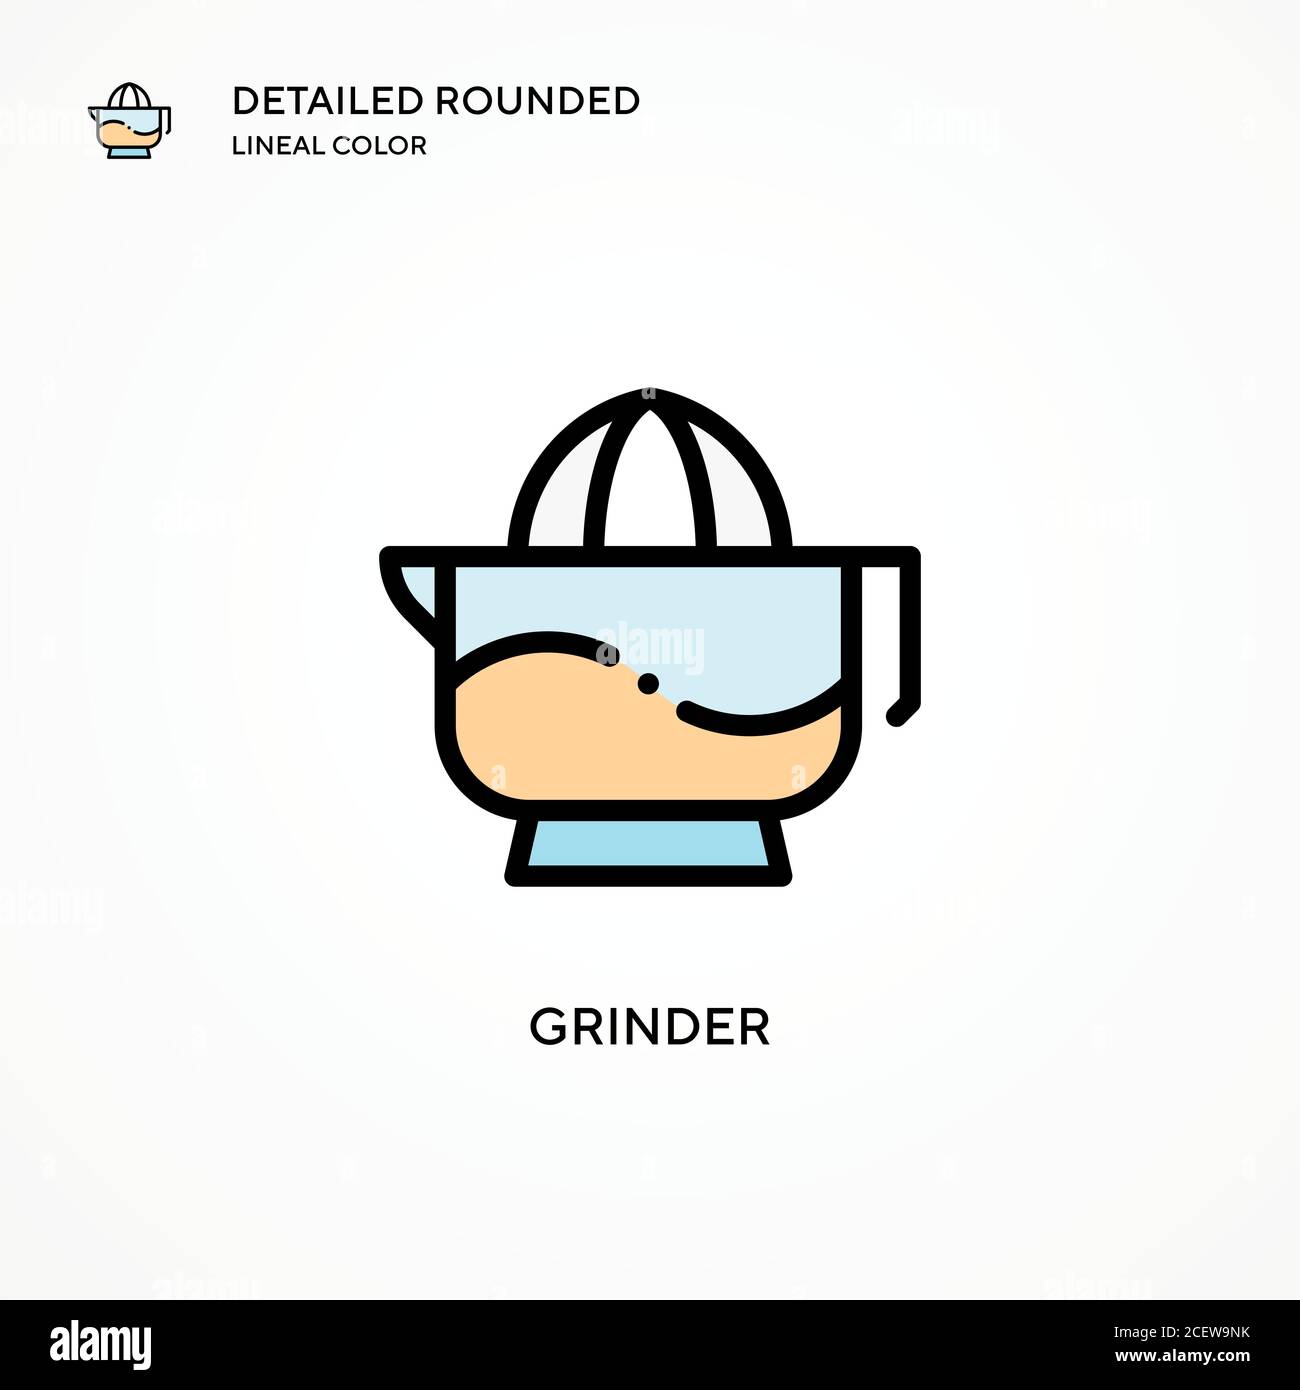 Grinder vector icon. Modern vector illustration concepts. Easy to edit and customize. Stock Vector